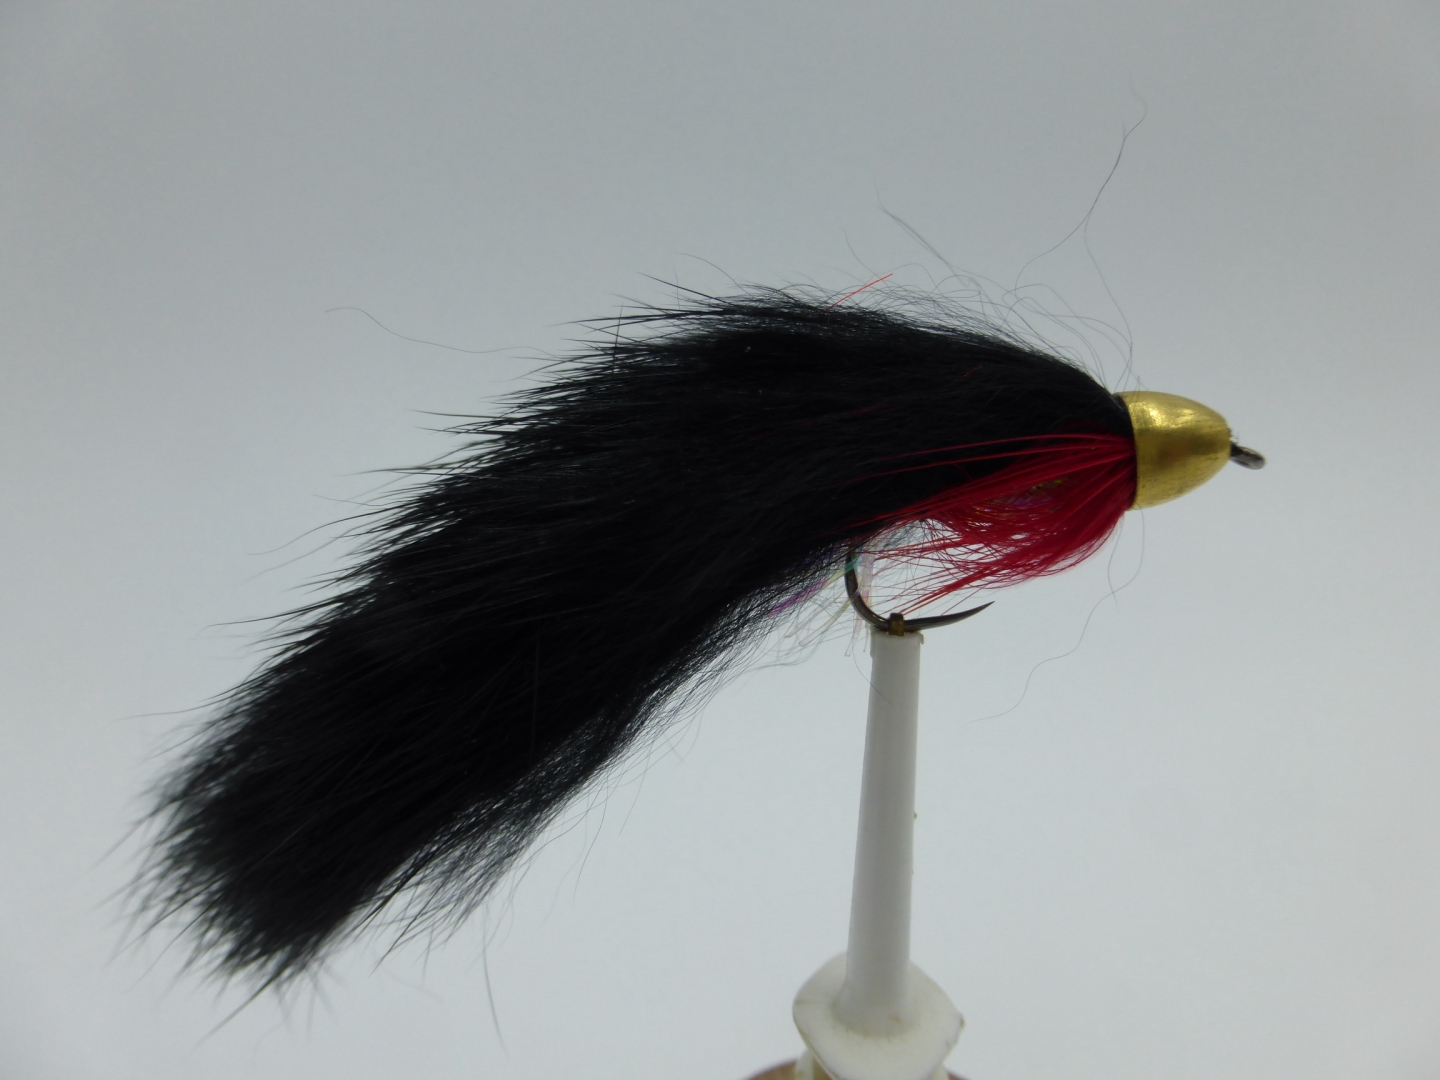 Size 10 Conehead Zonker Red/Black Barbless